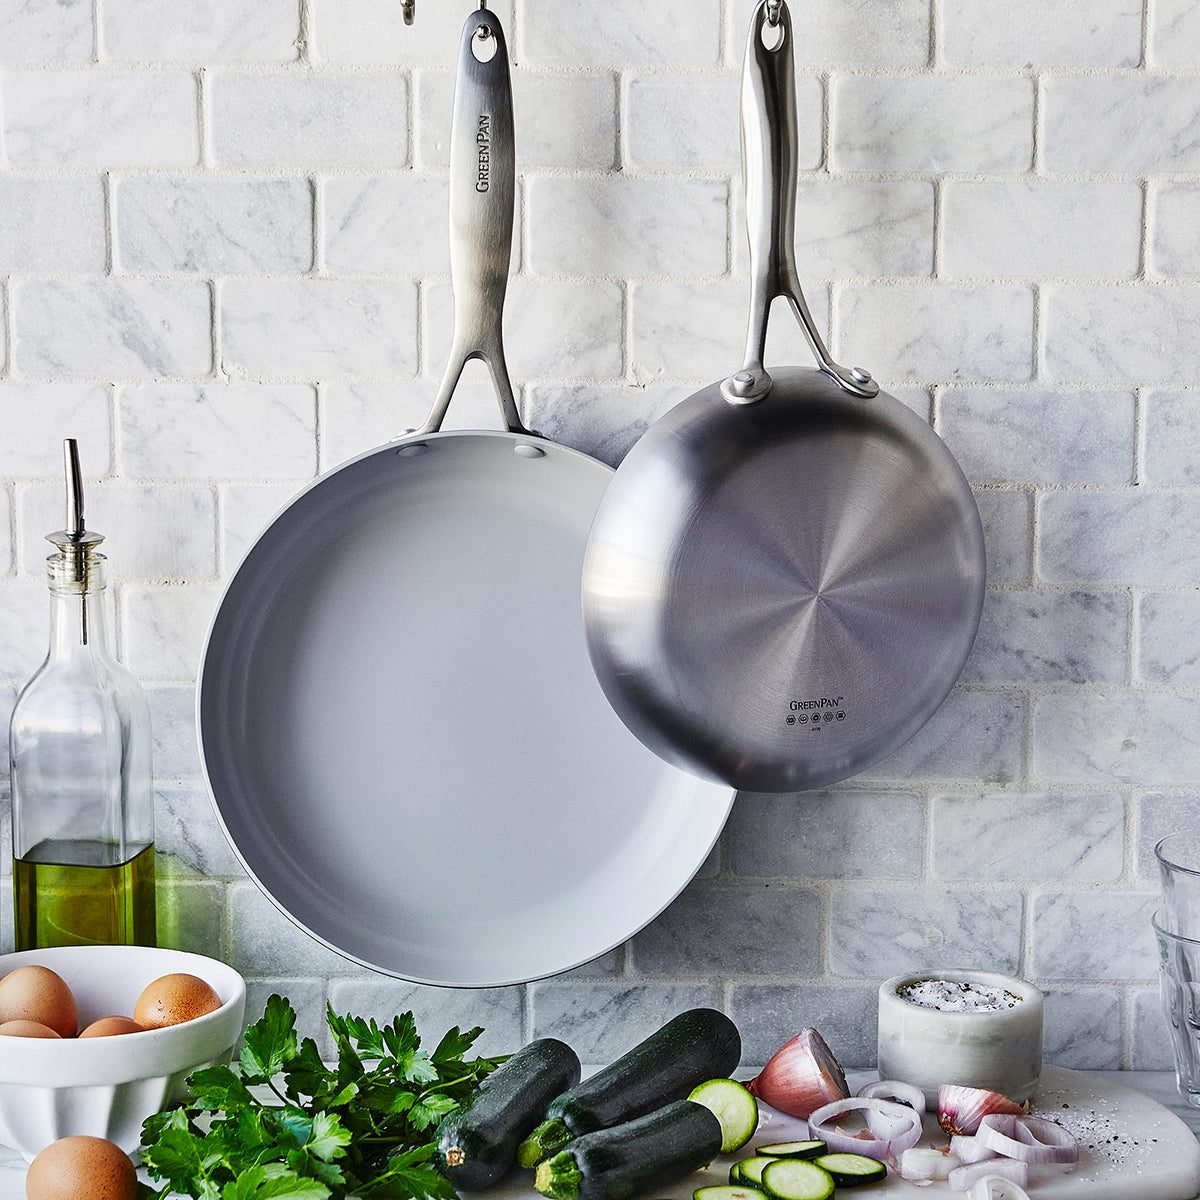 Nonstick Ceramic Cookware: Is the Coating Safe? - Get Green Be Well